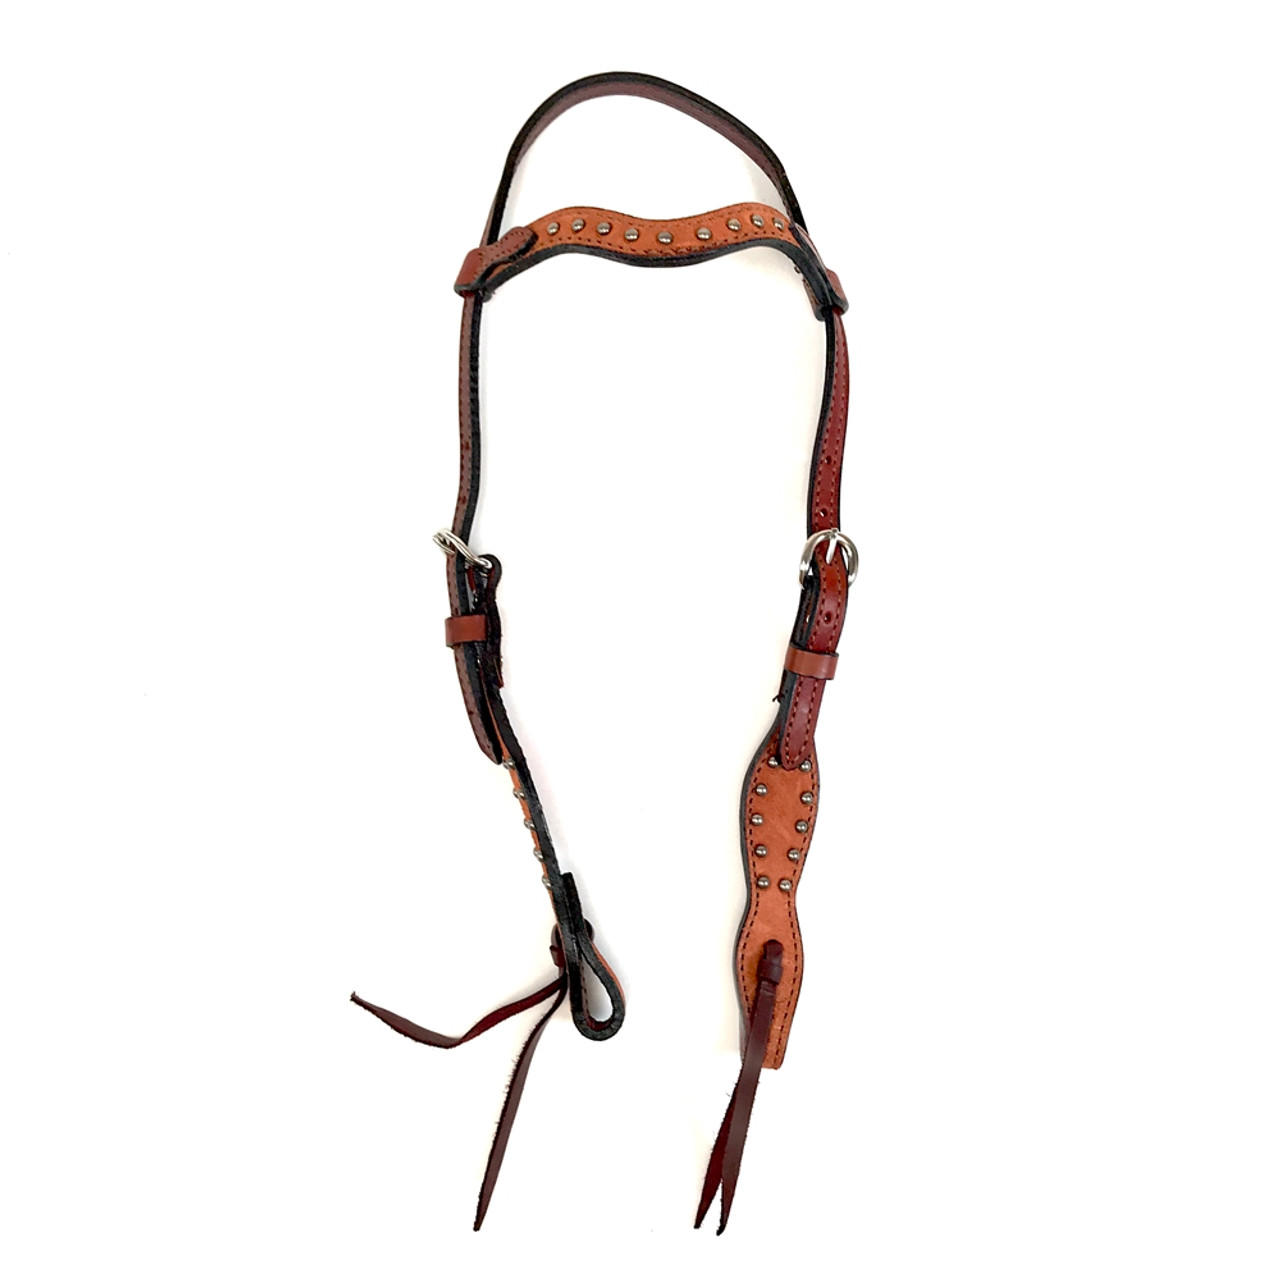 Slip Ear Headstall, Roughout Leather, Pewter Studs